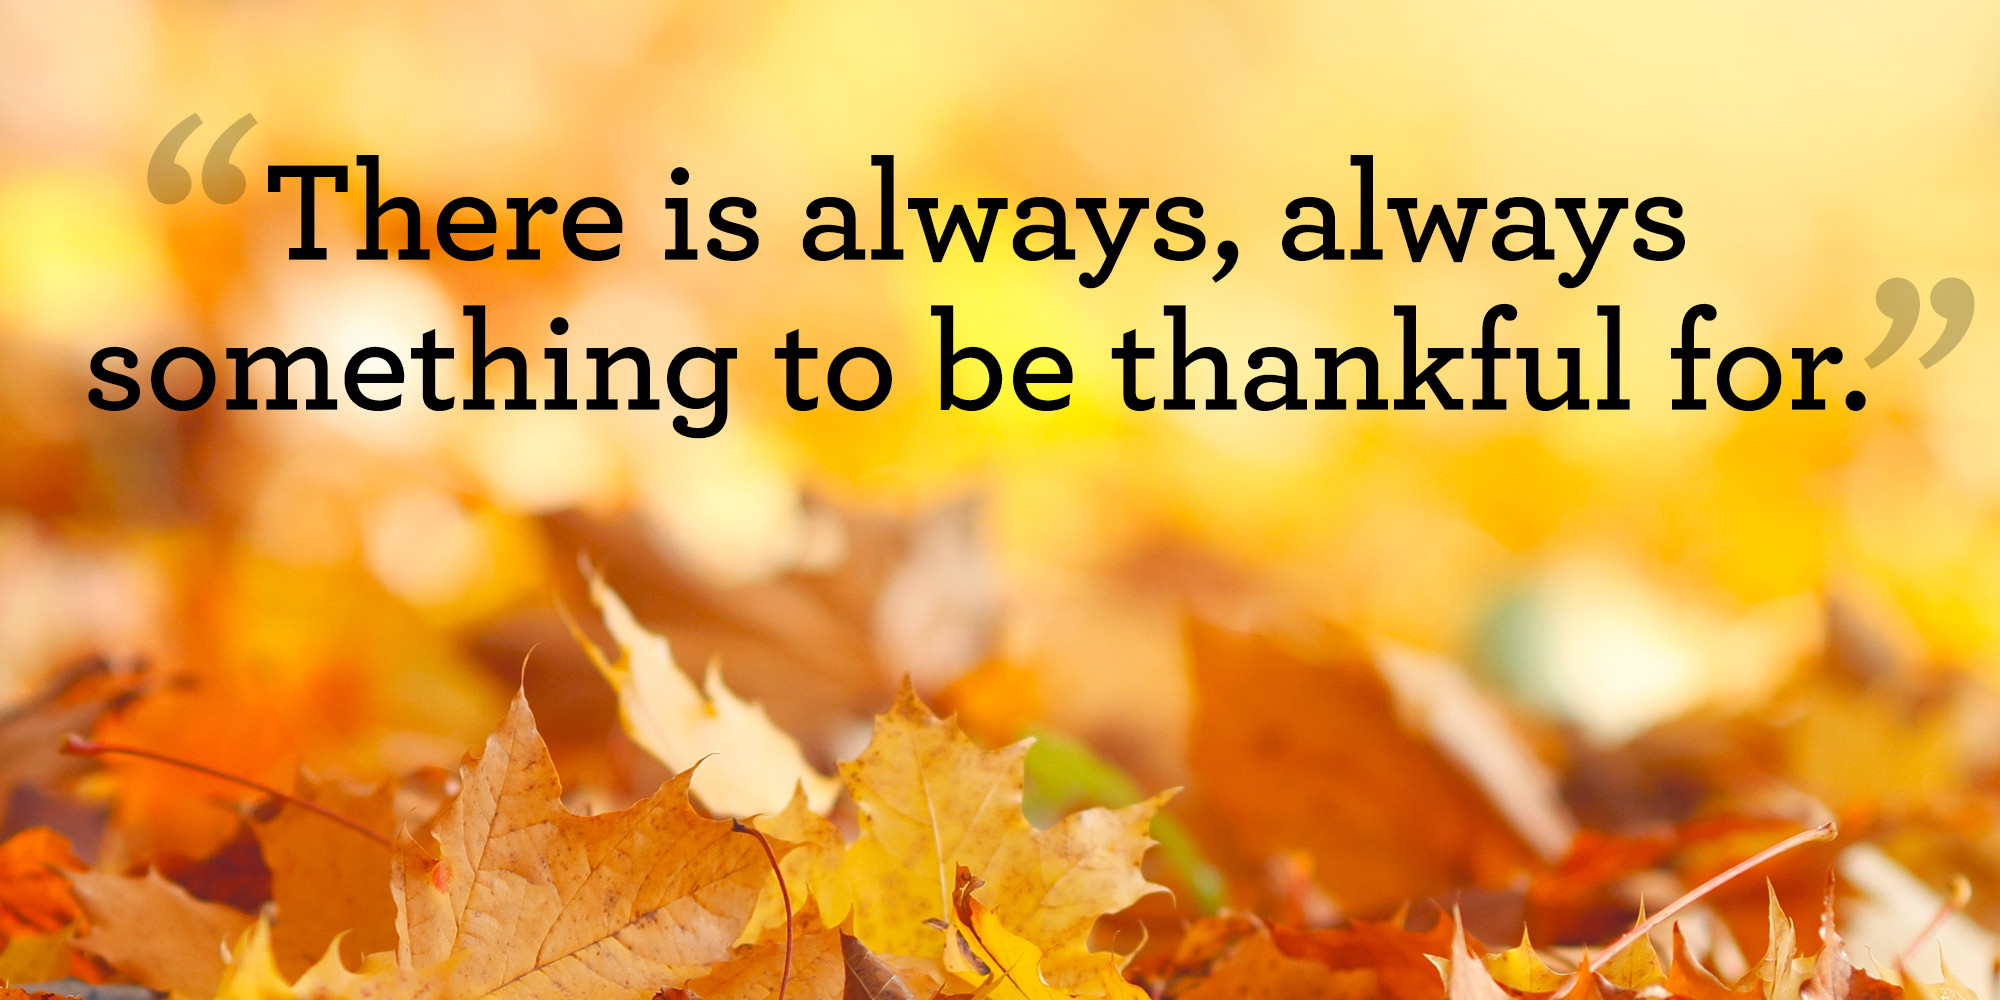 Quote On Thanksgiving
 10 Best Thanksgiving Quotes Meaningful Thanksgiving Sayings